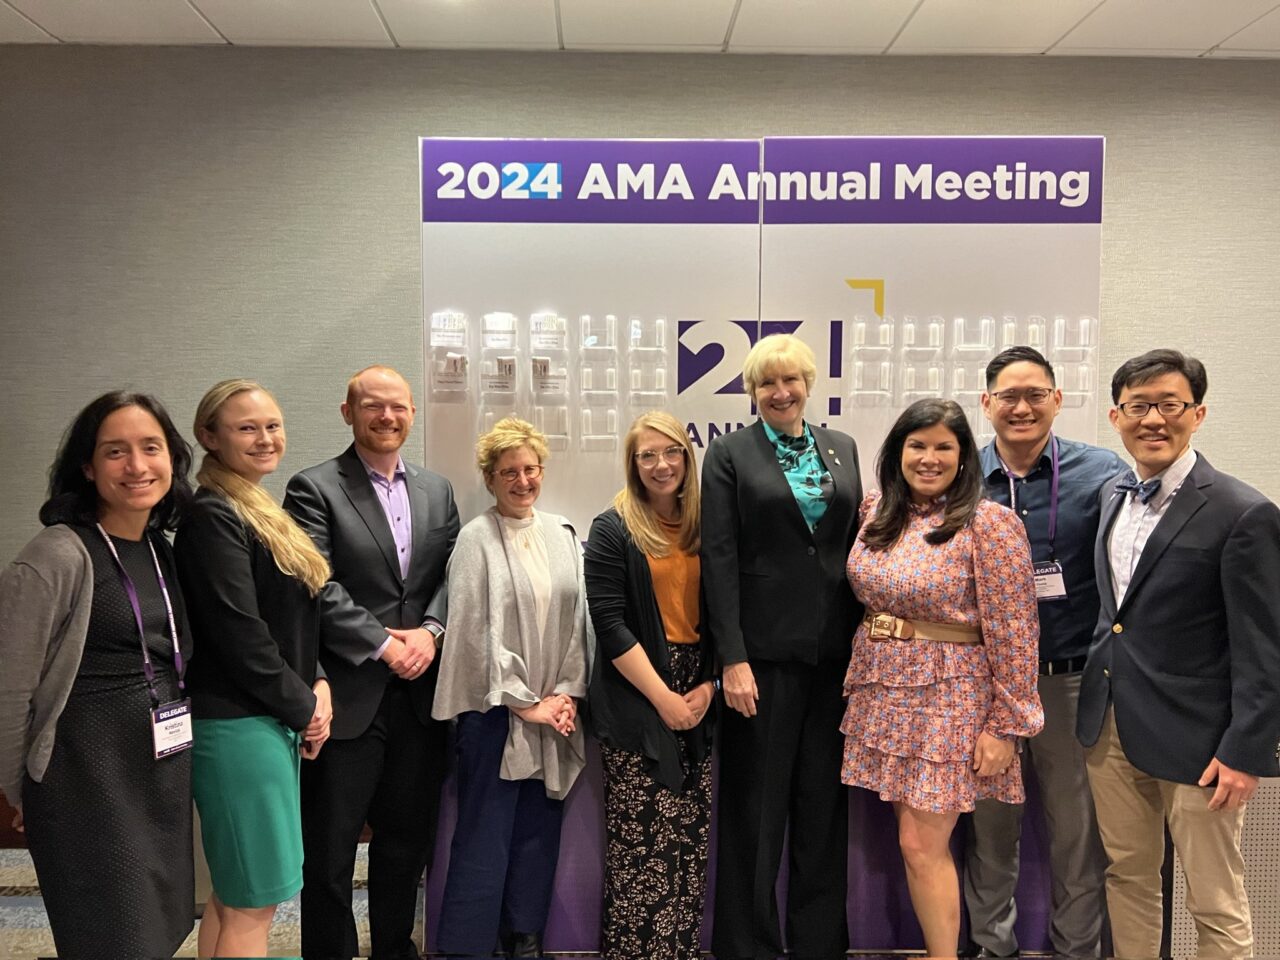 Steve Lee: Proud to be part of an influential ASCO delegation to American Medical Association